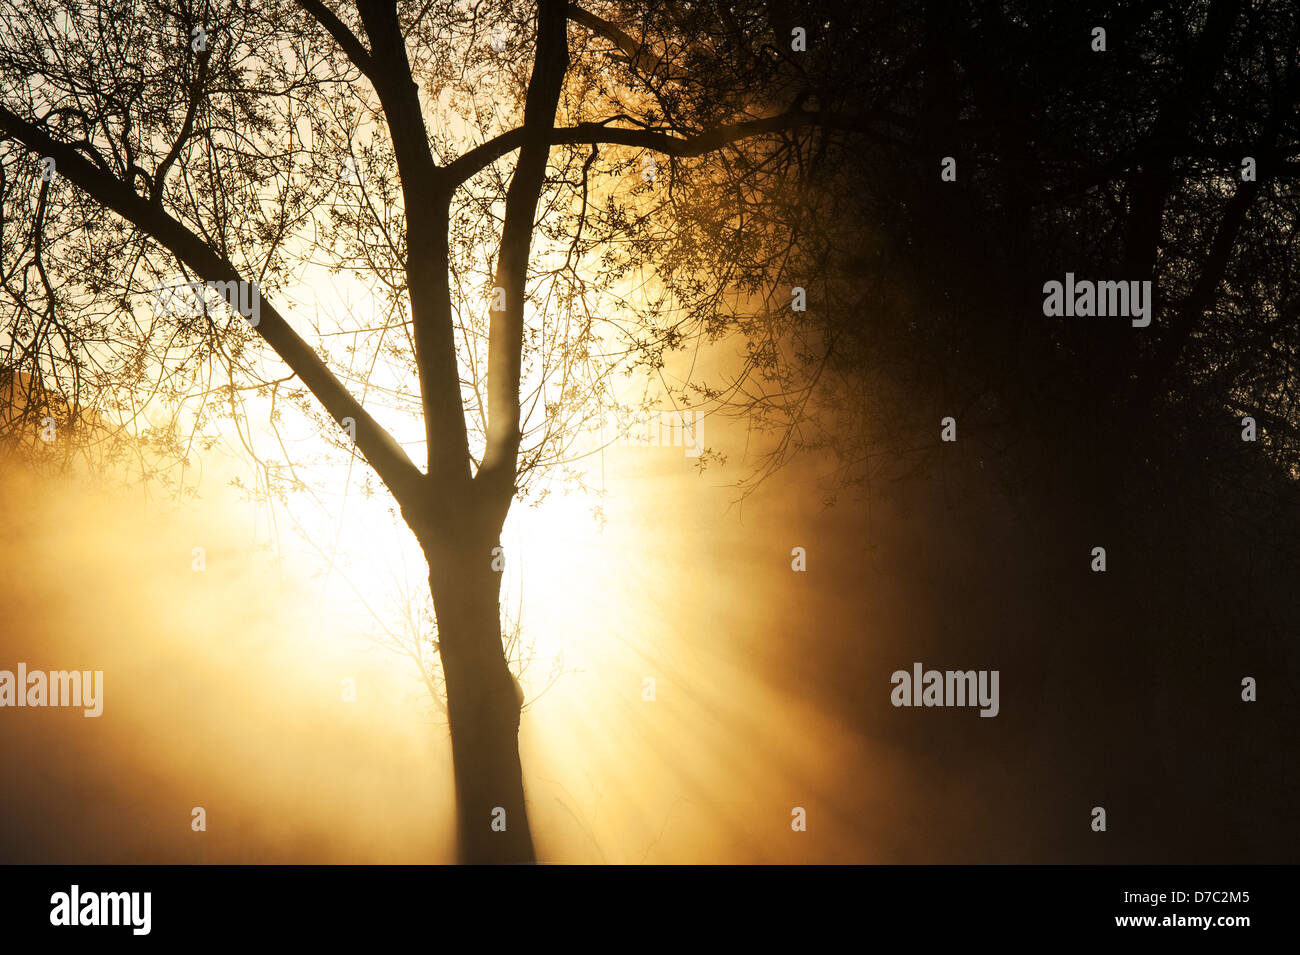 Silhouette tree in front of a sunrise. English countryside Stock Photo